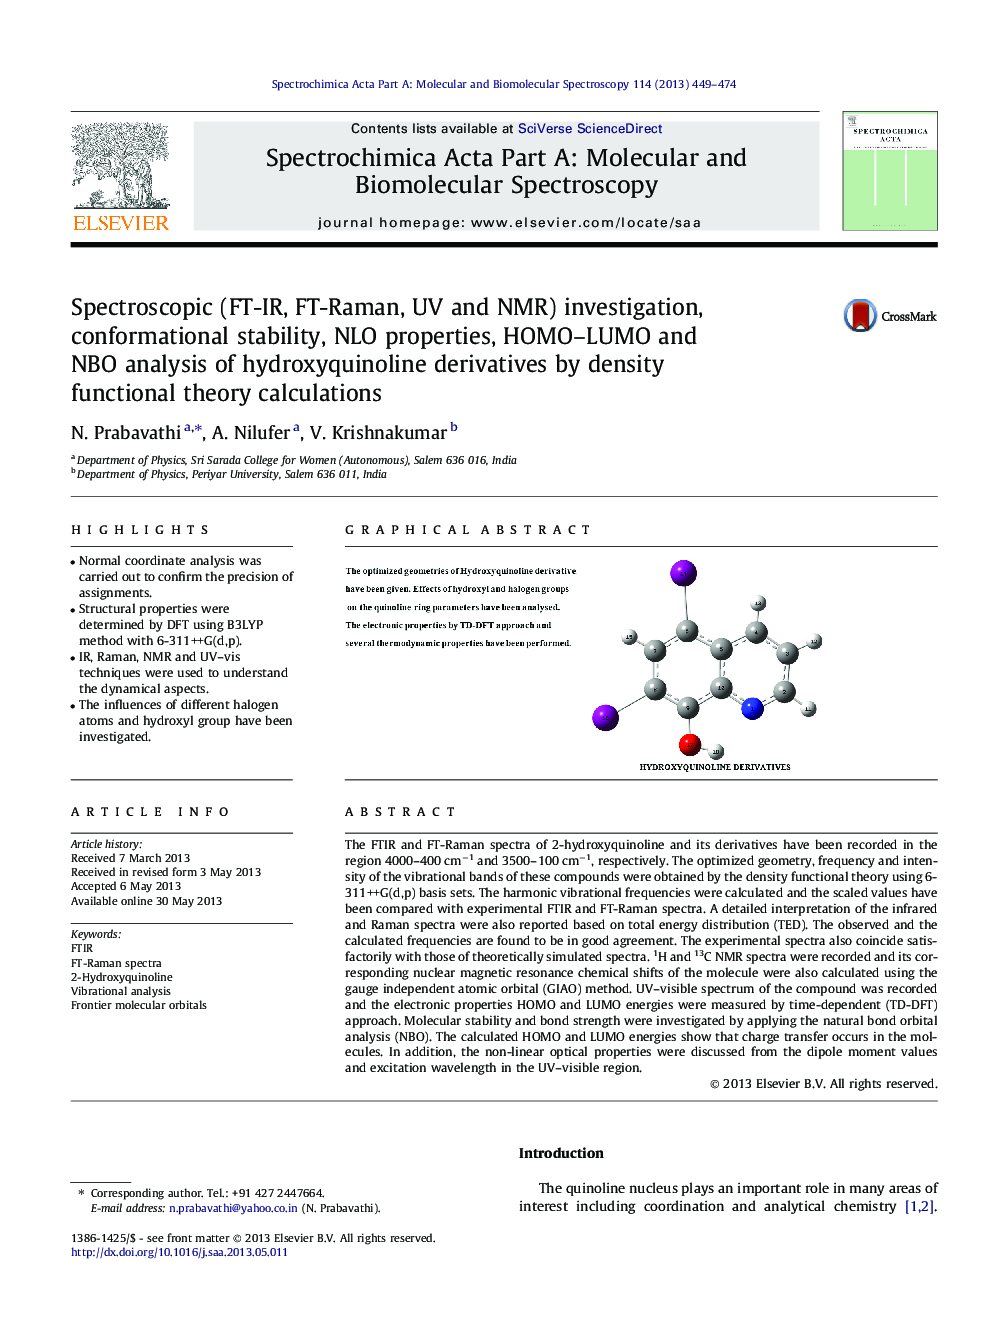 Spectroscopic (FT-IR, FT-Raman, UV and NMR) investigation, conformational stability, NLO properties, HOMO–LUMO and NBO analysis of hydroxyquinoline derivatives by density functional theory calculations